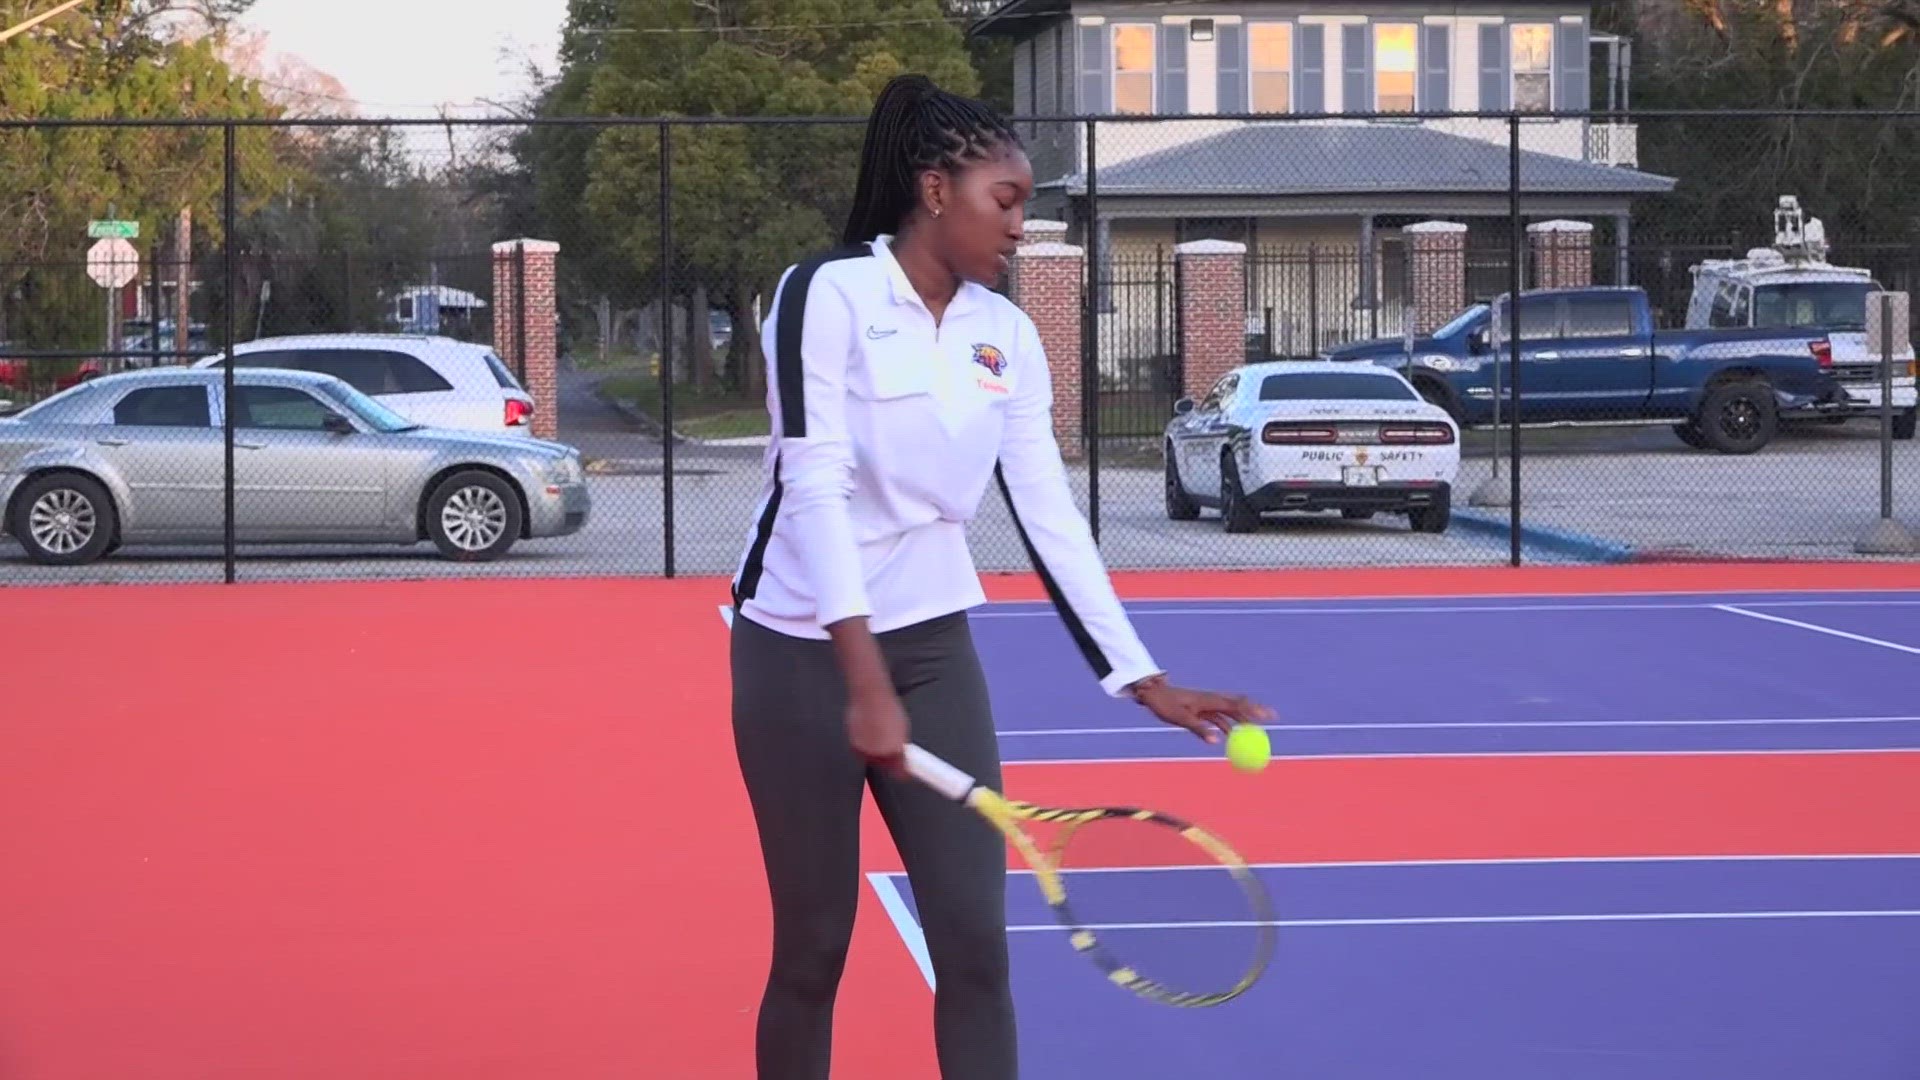 [6:13 PM] Blank, Nicklaus
The EWU women's tennis team is on the forefront of adding Black representation to Jacksonville's tennis landscape.